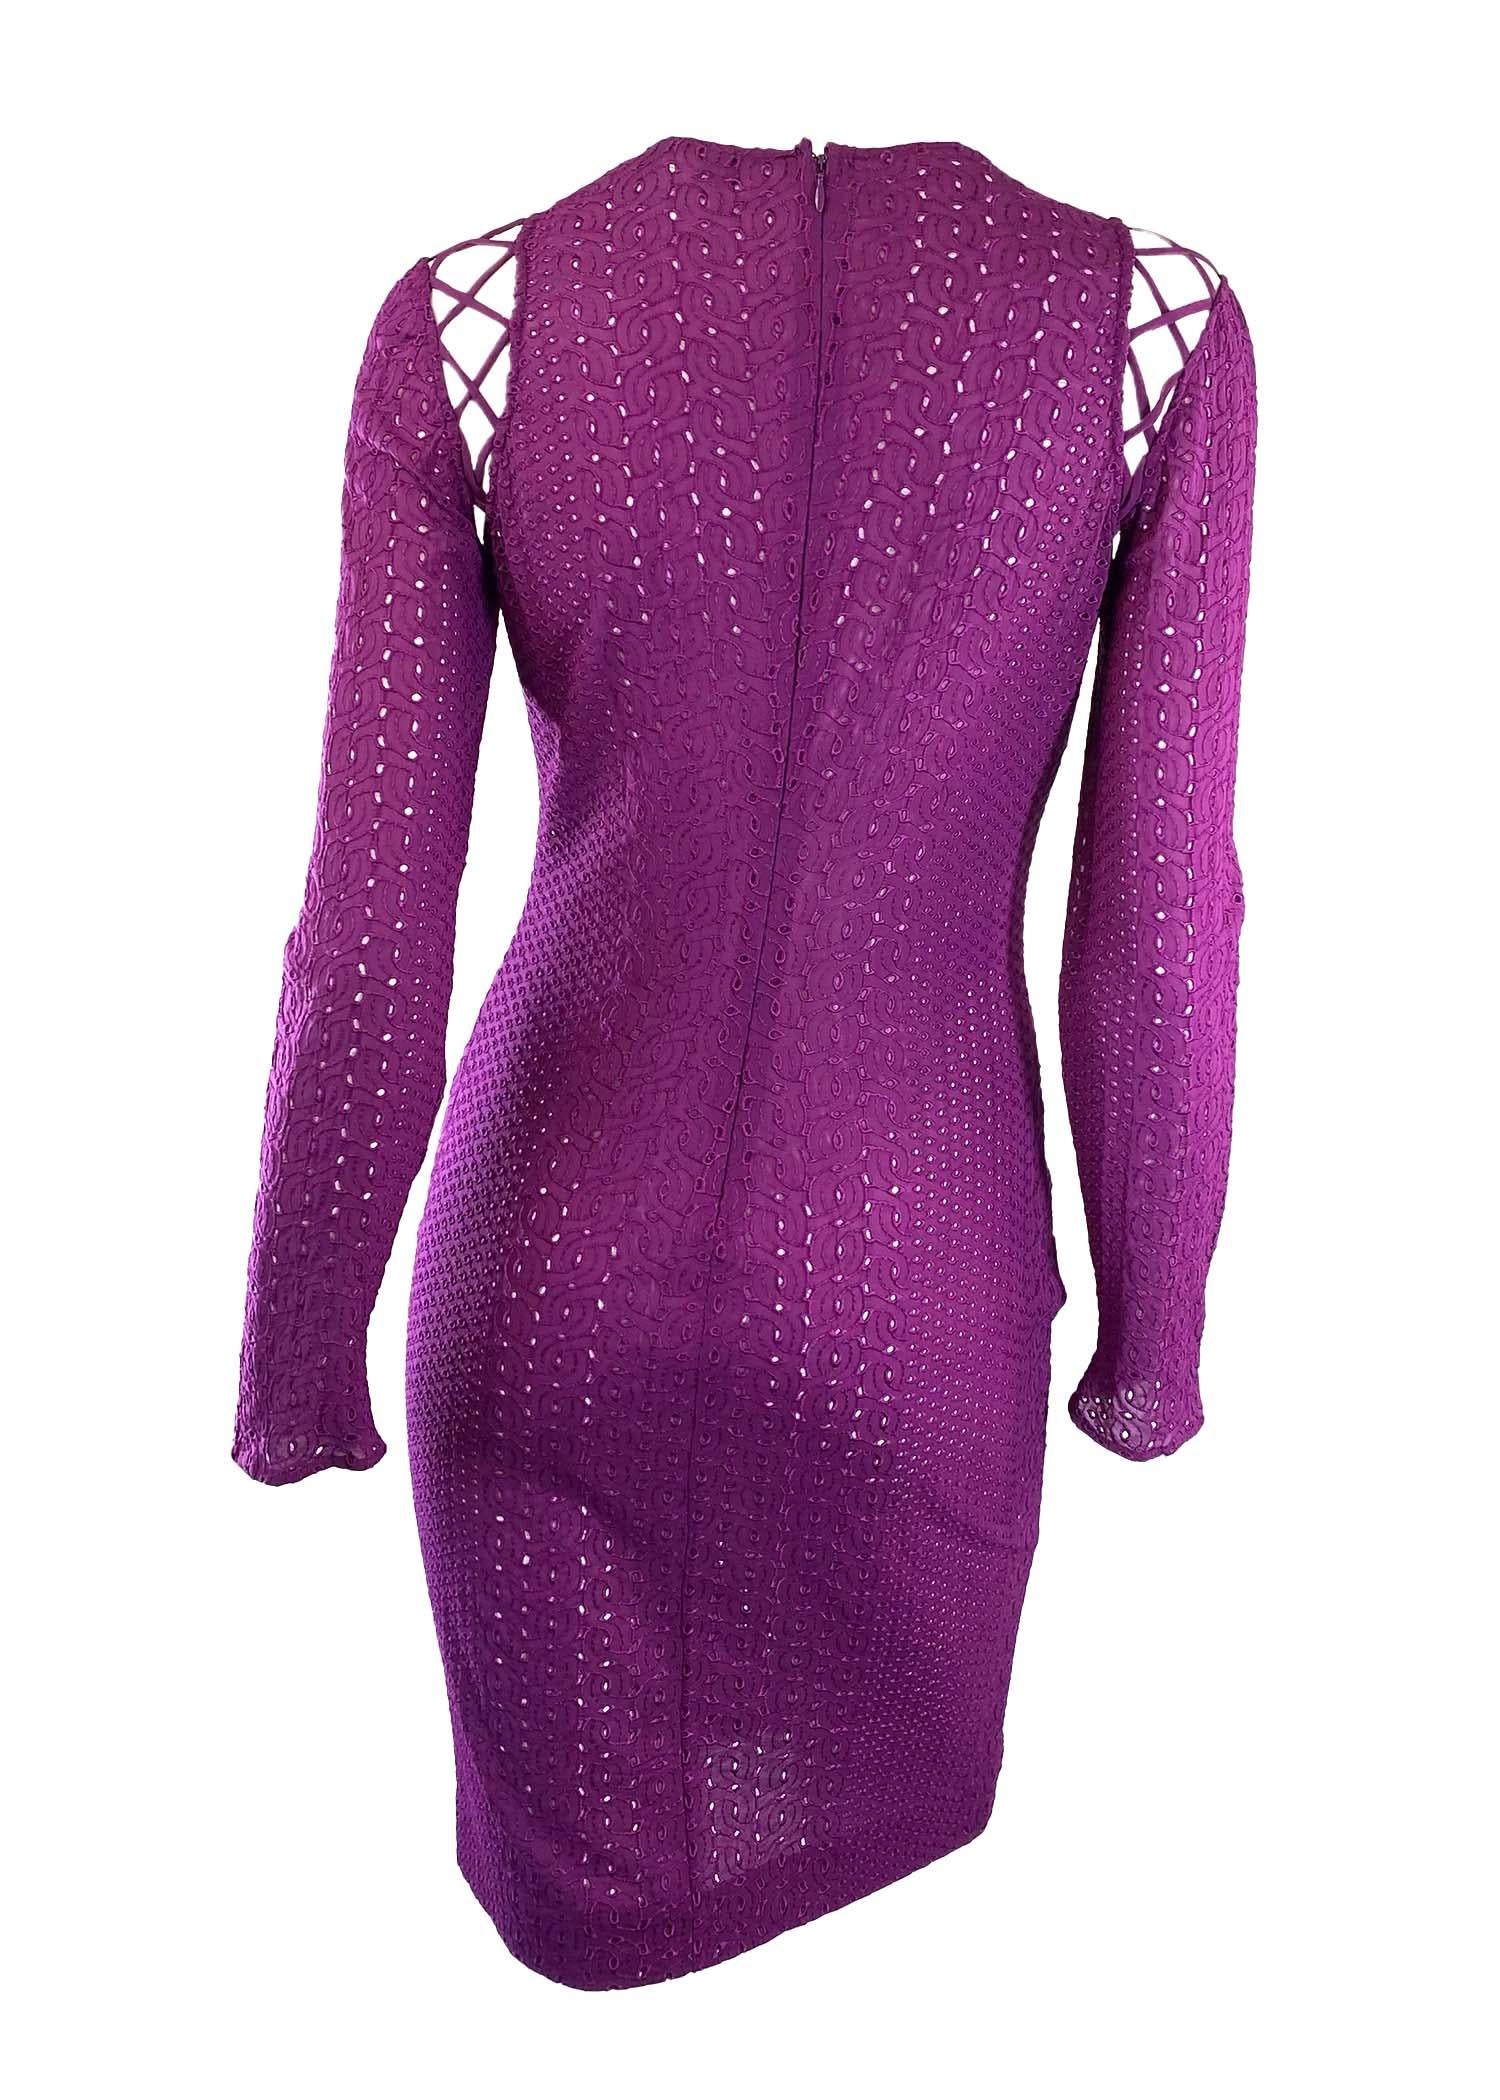 Women's S/S 2002 Gianni Versace by Donatella Purple Lace-Up Eyelet Dress For Sale